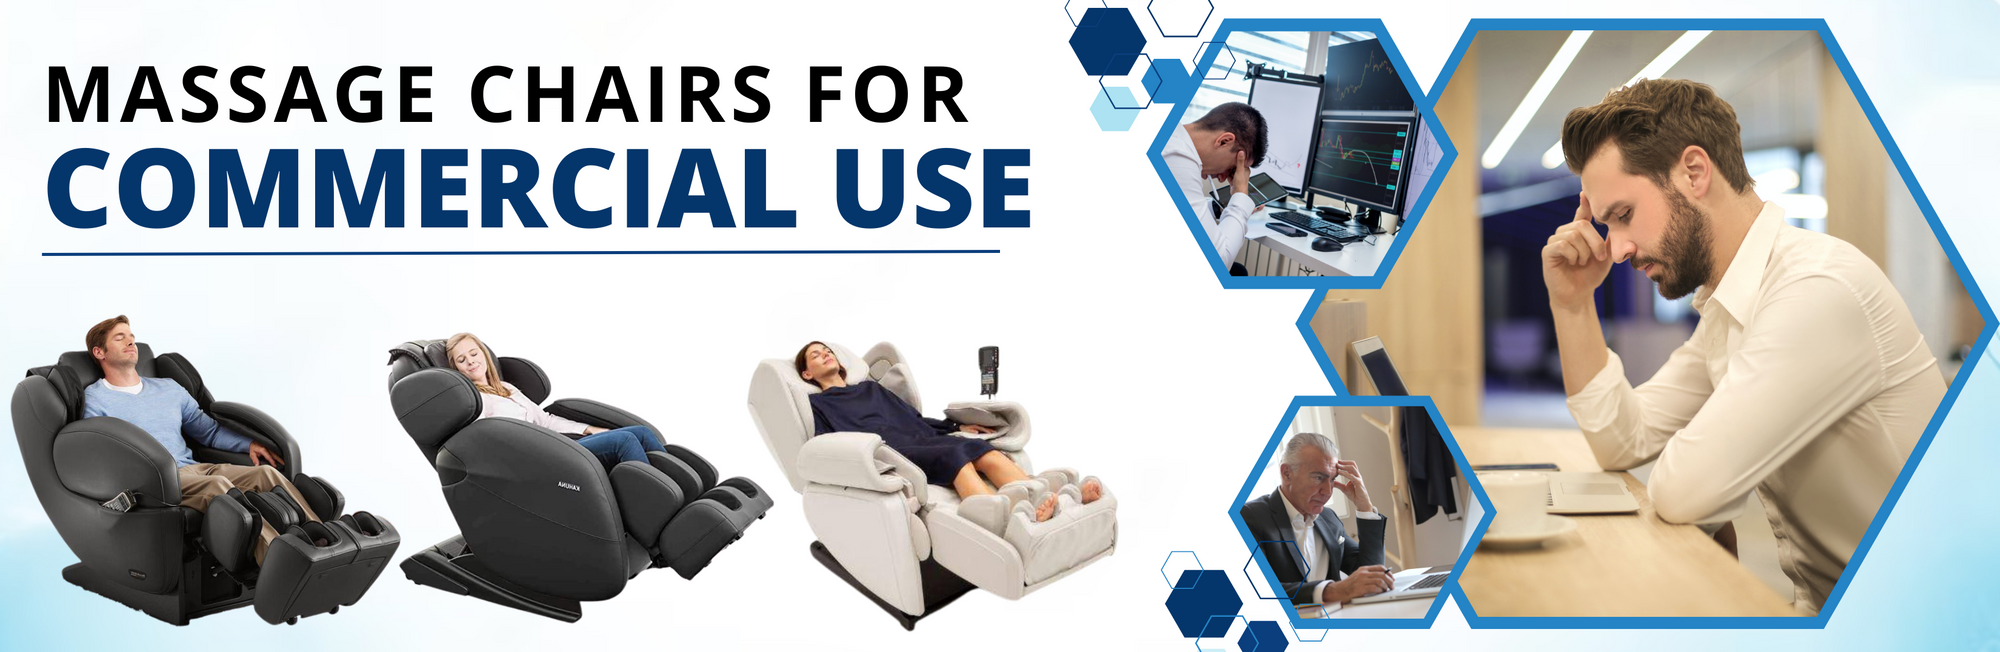 Commercial massage chairs are increasingly being used in offices, salons, employee lounges, nurse lounges, airports, malls, hotels, and spas